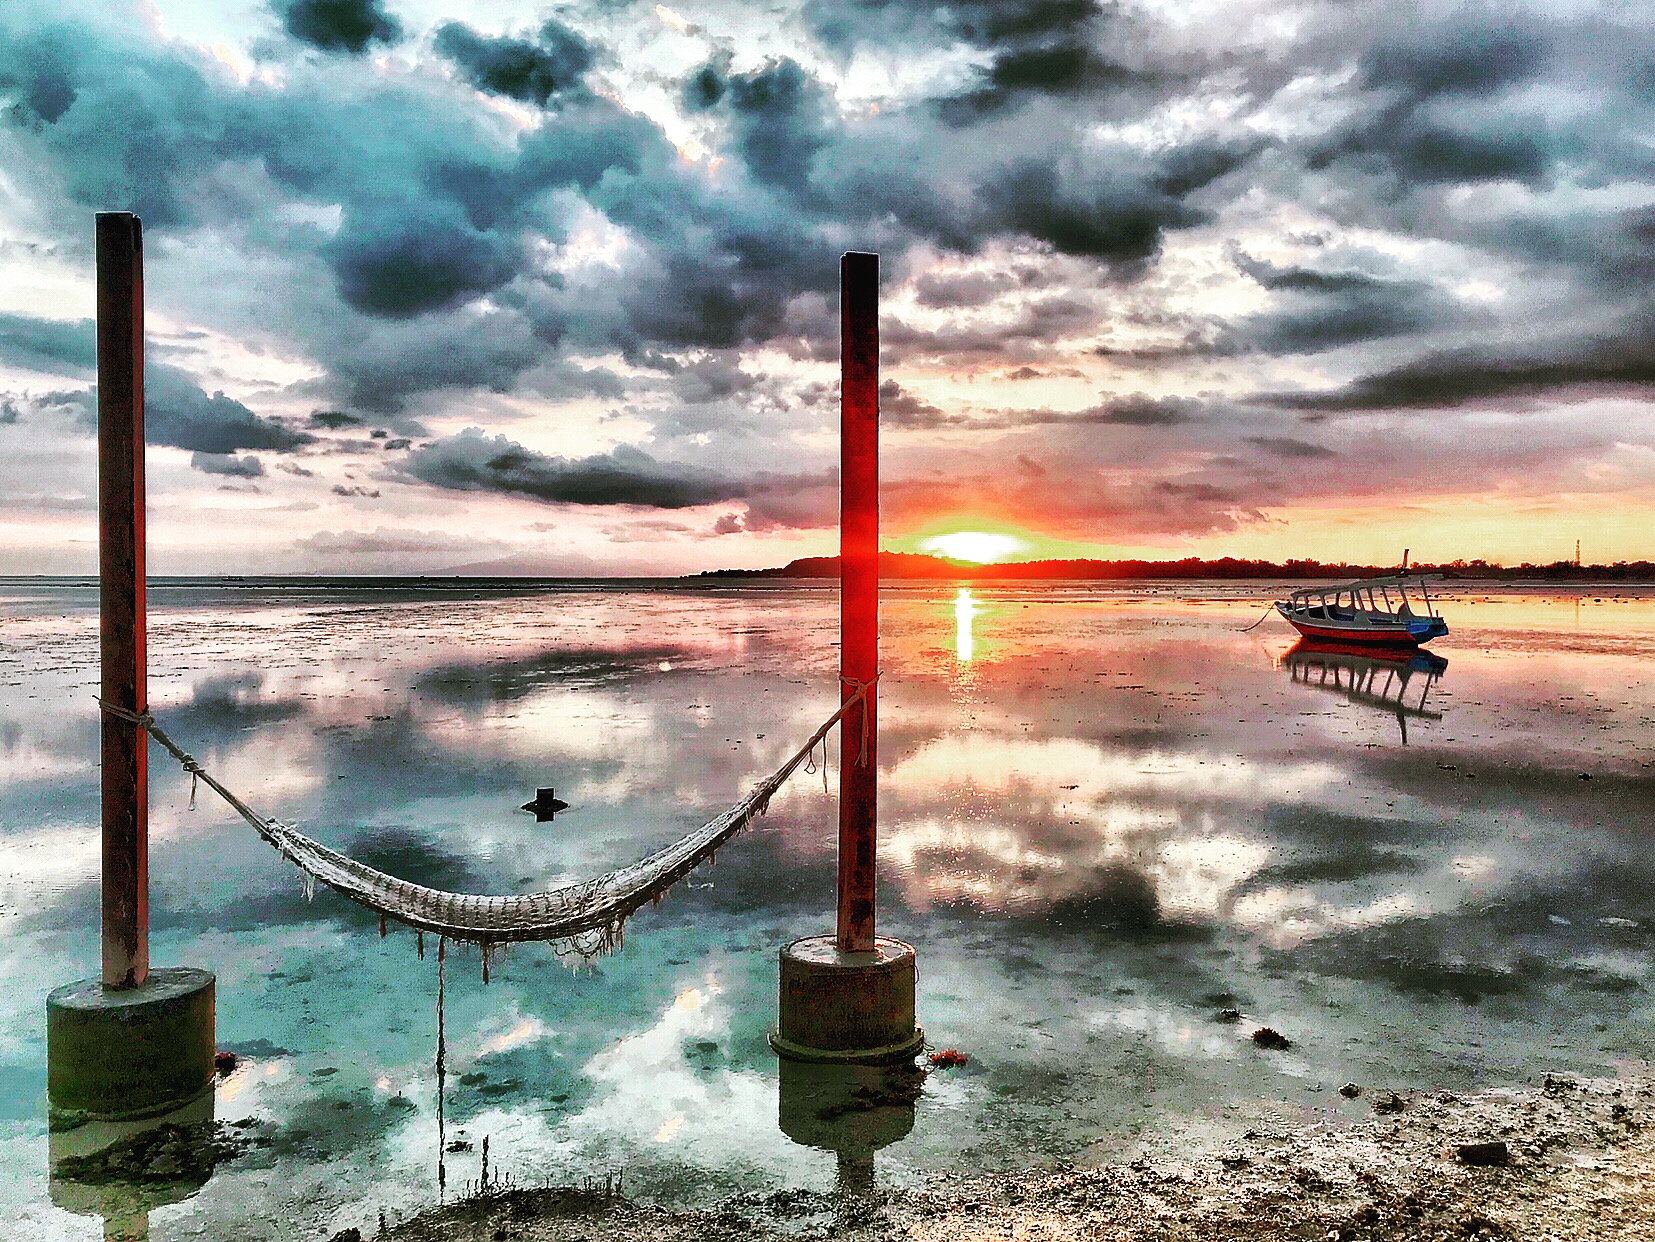 The Best Gili Air Restaurants, Cafes, And Happy Hours